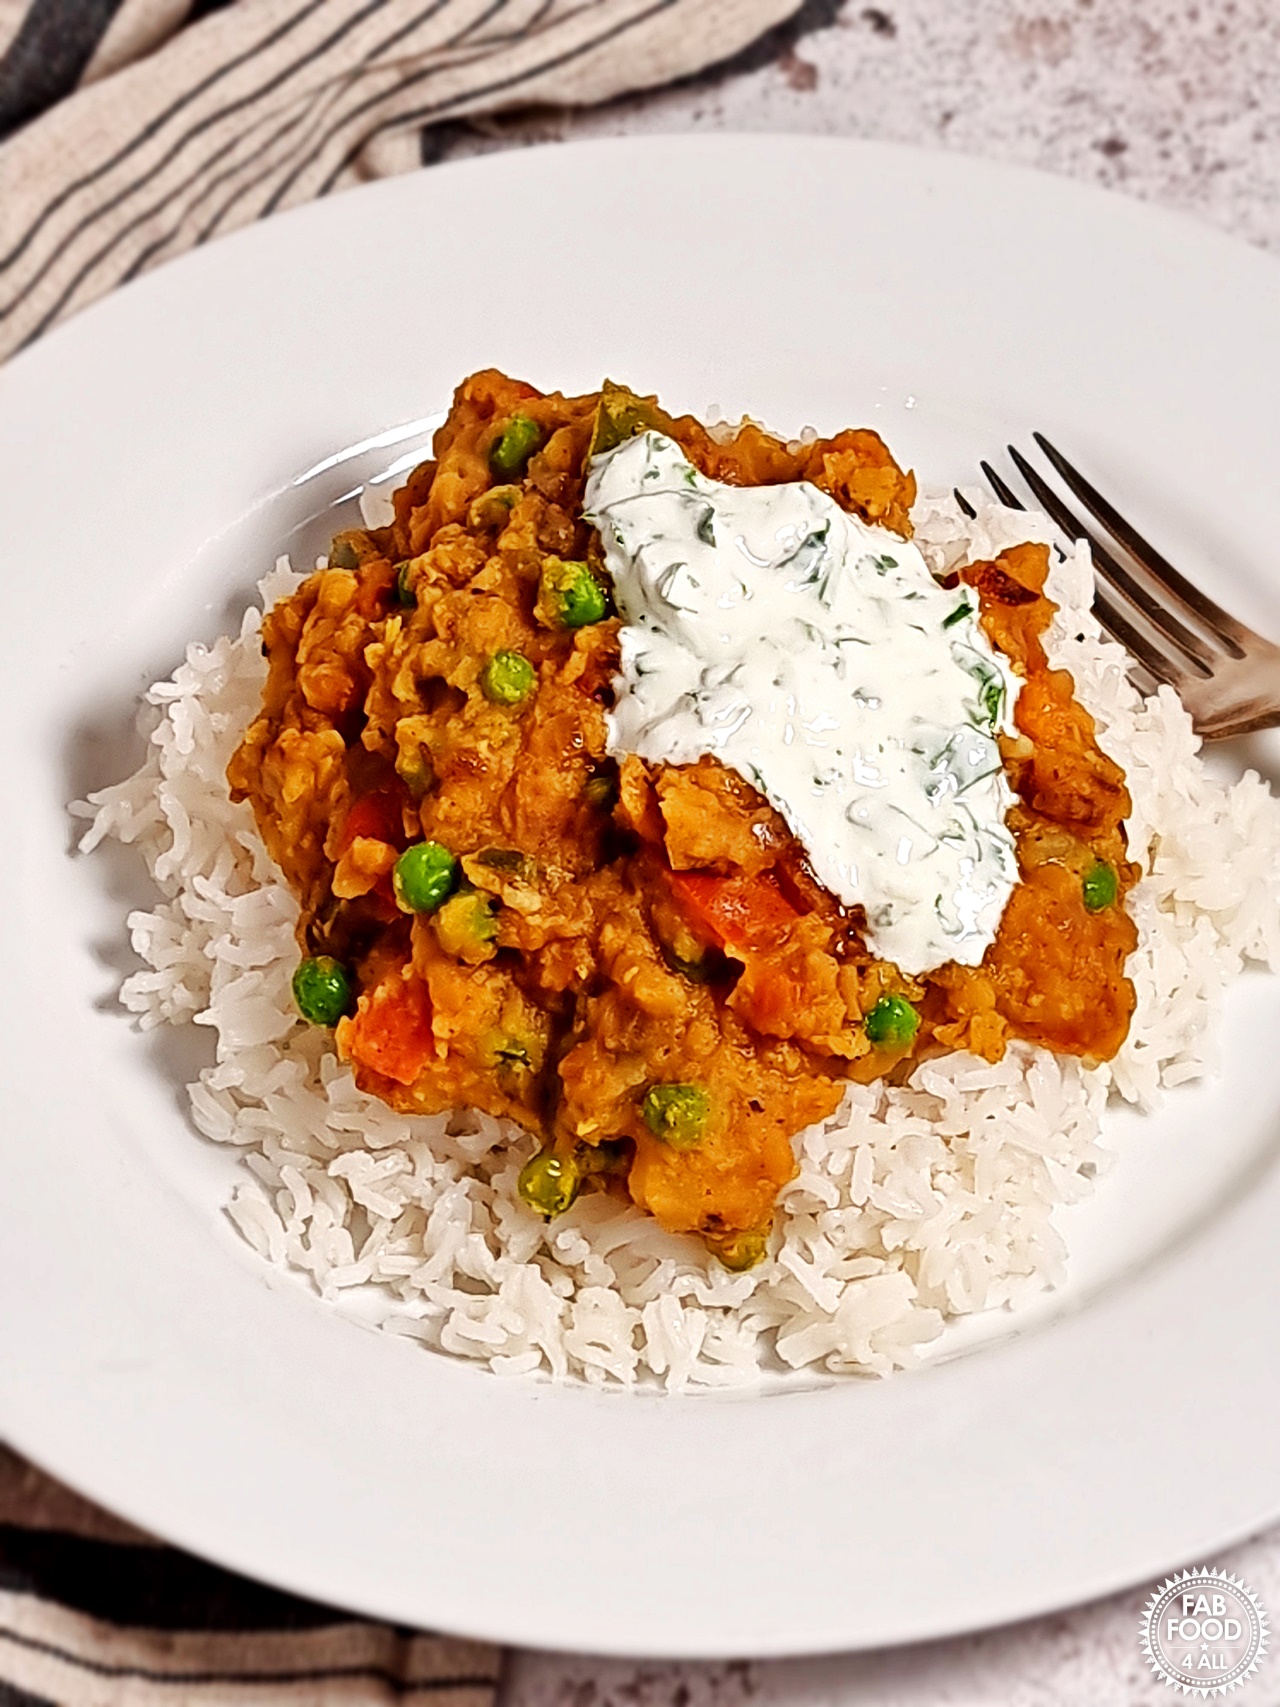 Vegetable Dhal Curry with rice & garnished with coriander yogurt dressing.